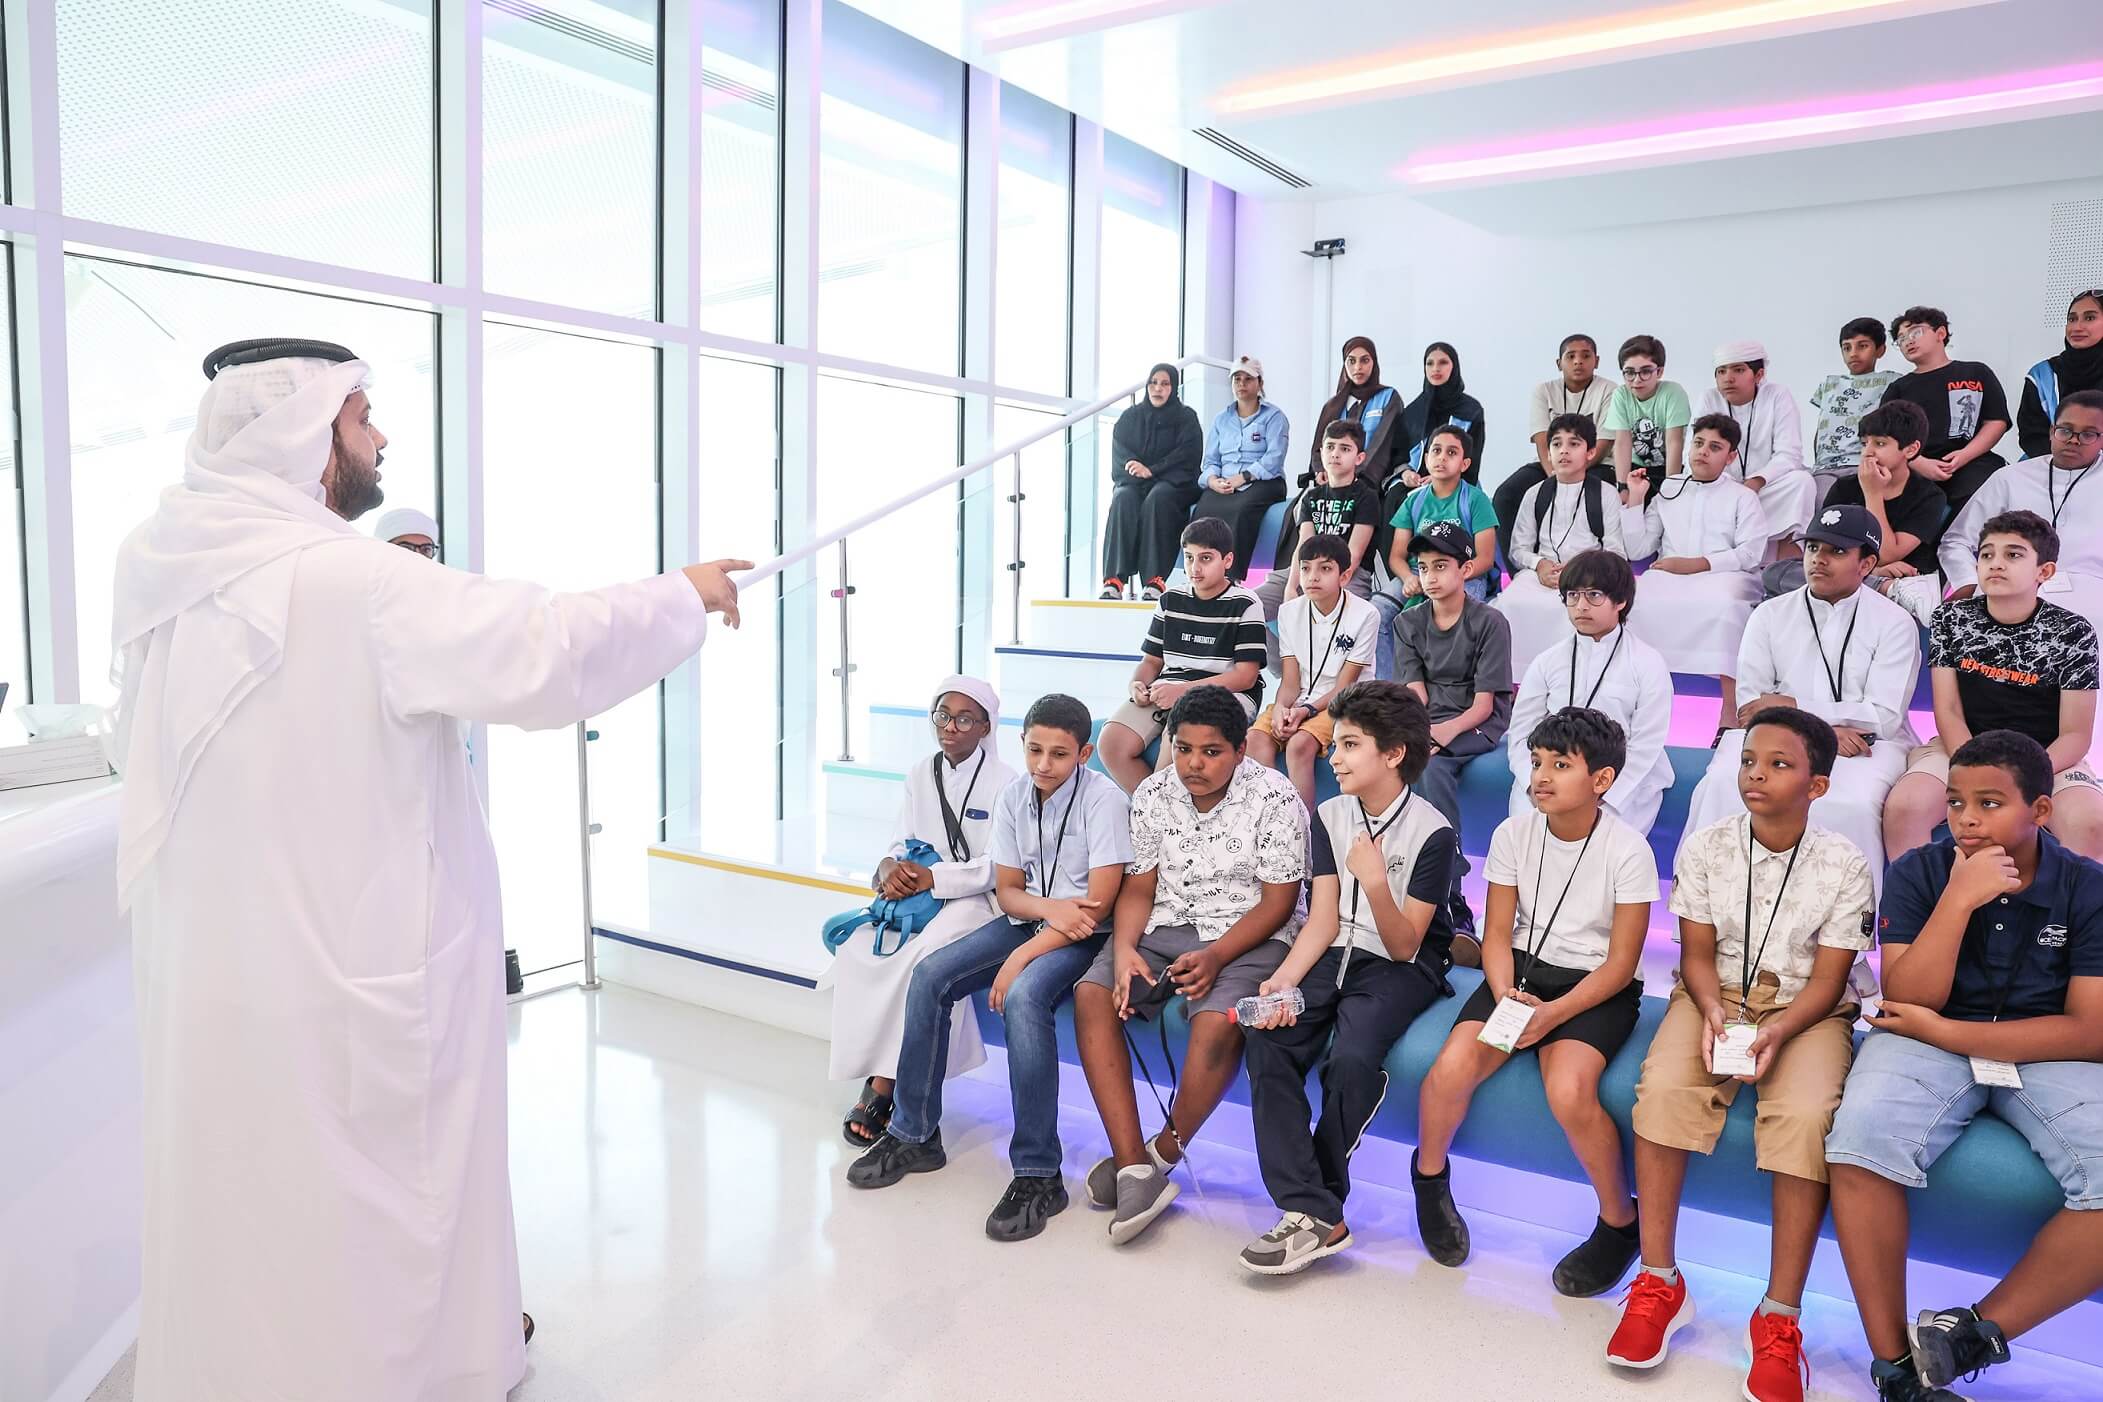 DEWA’s Innovation Centre enriches educational activities for sustainability awareness